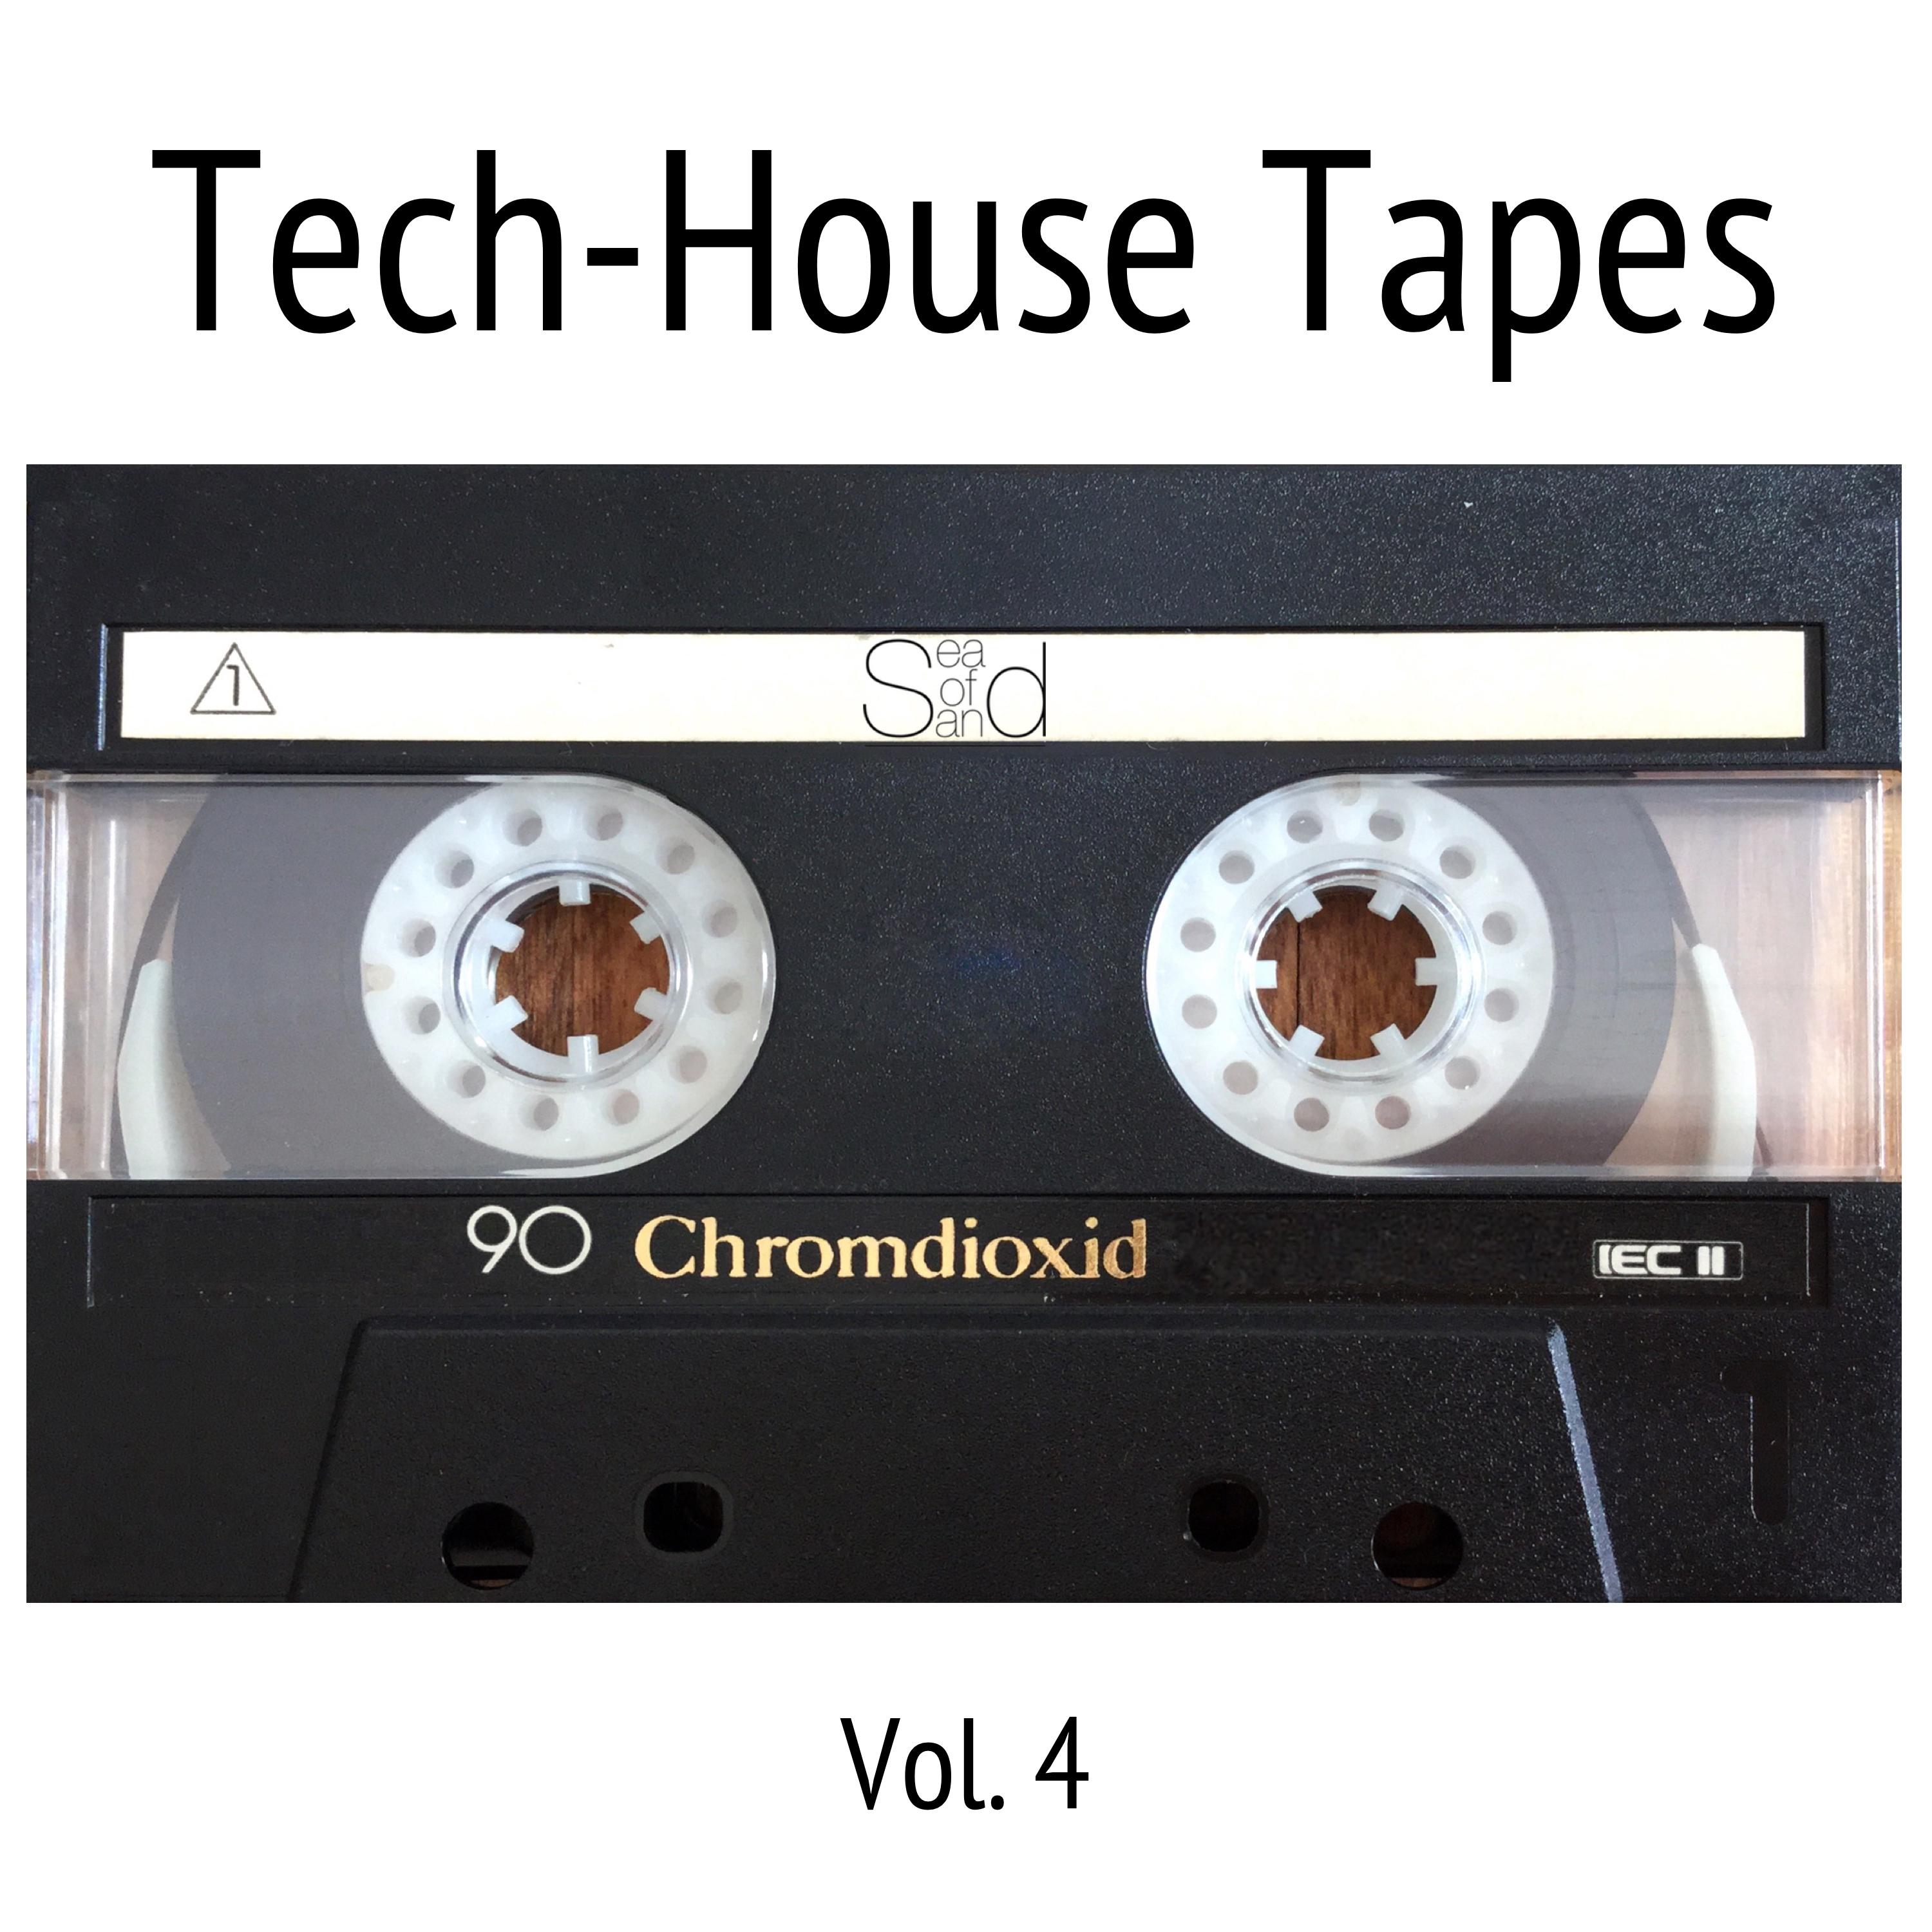 Tech-House Tapes, Vol. 4